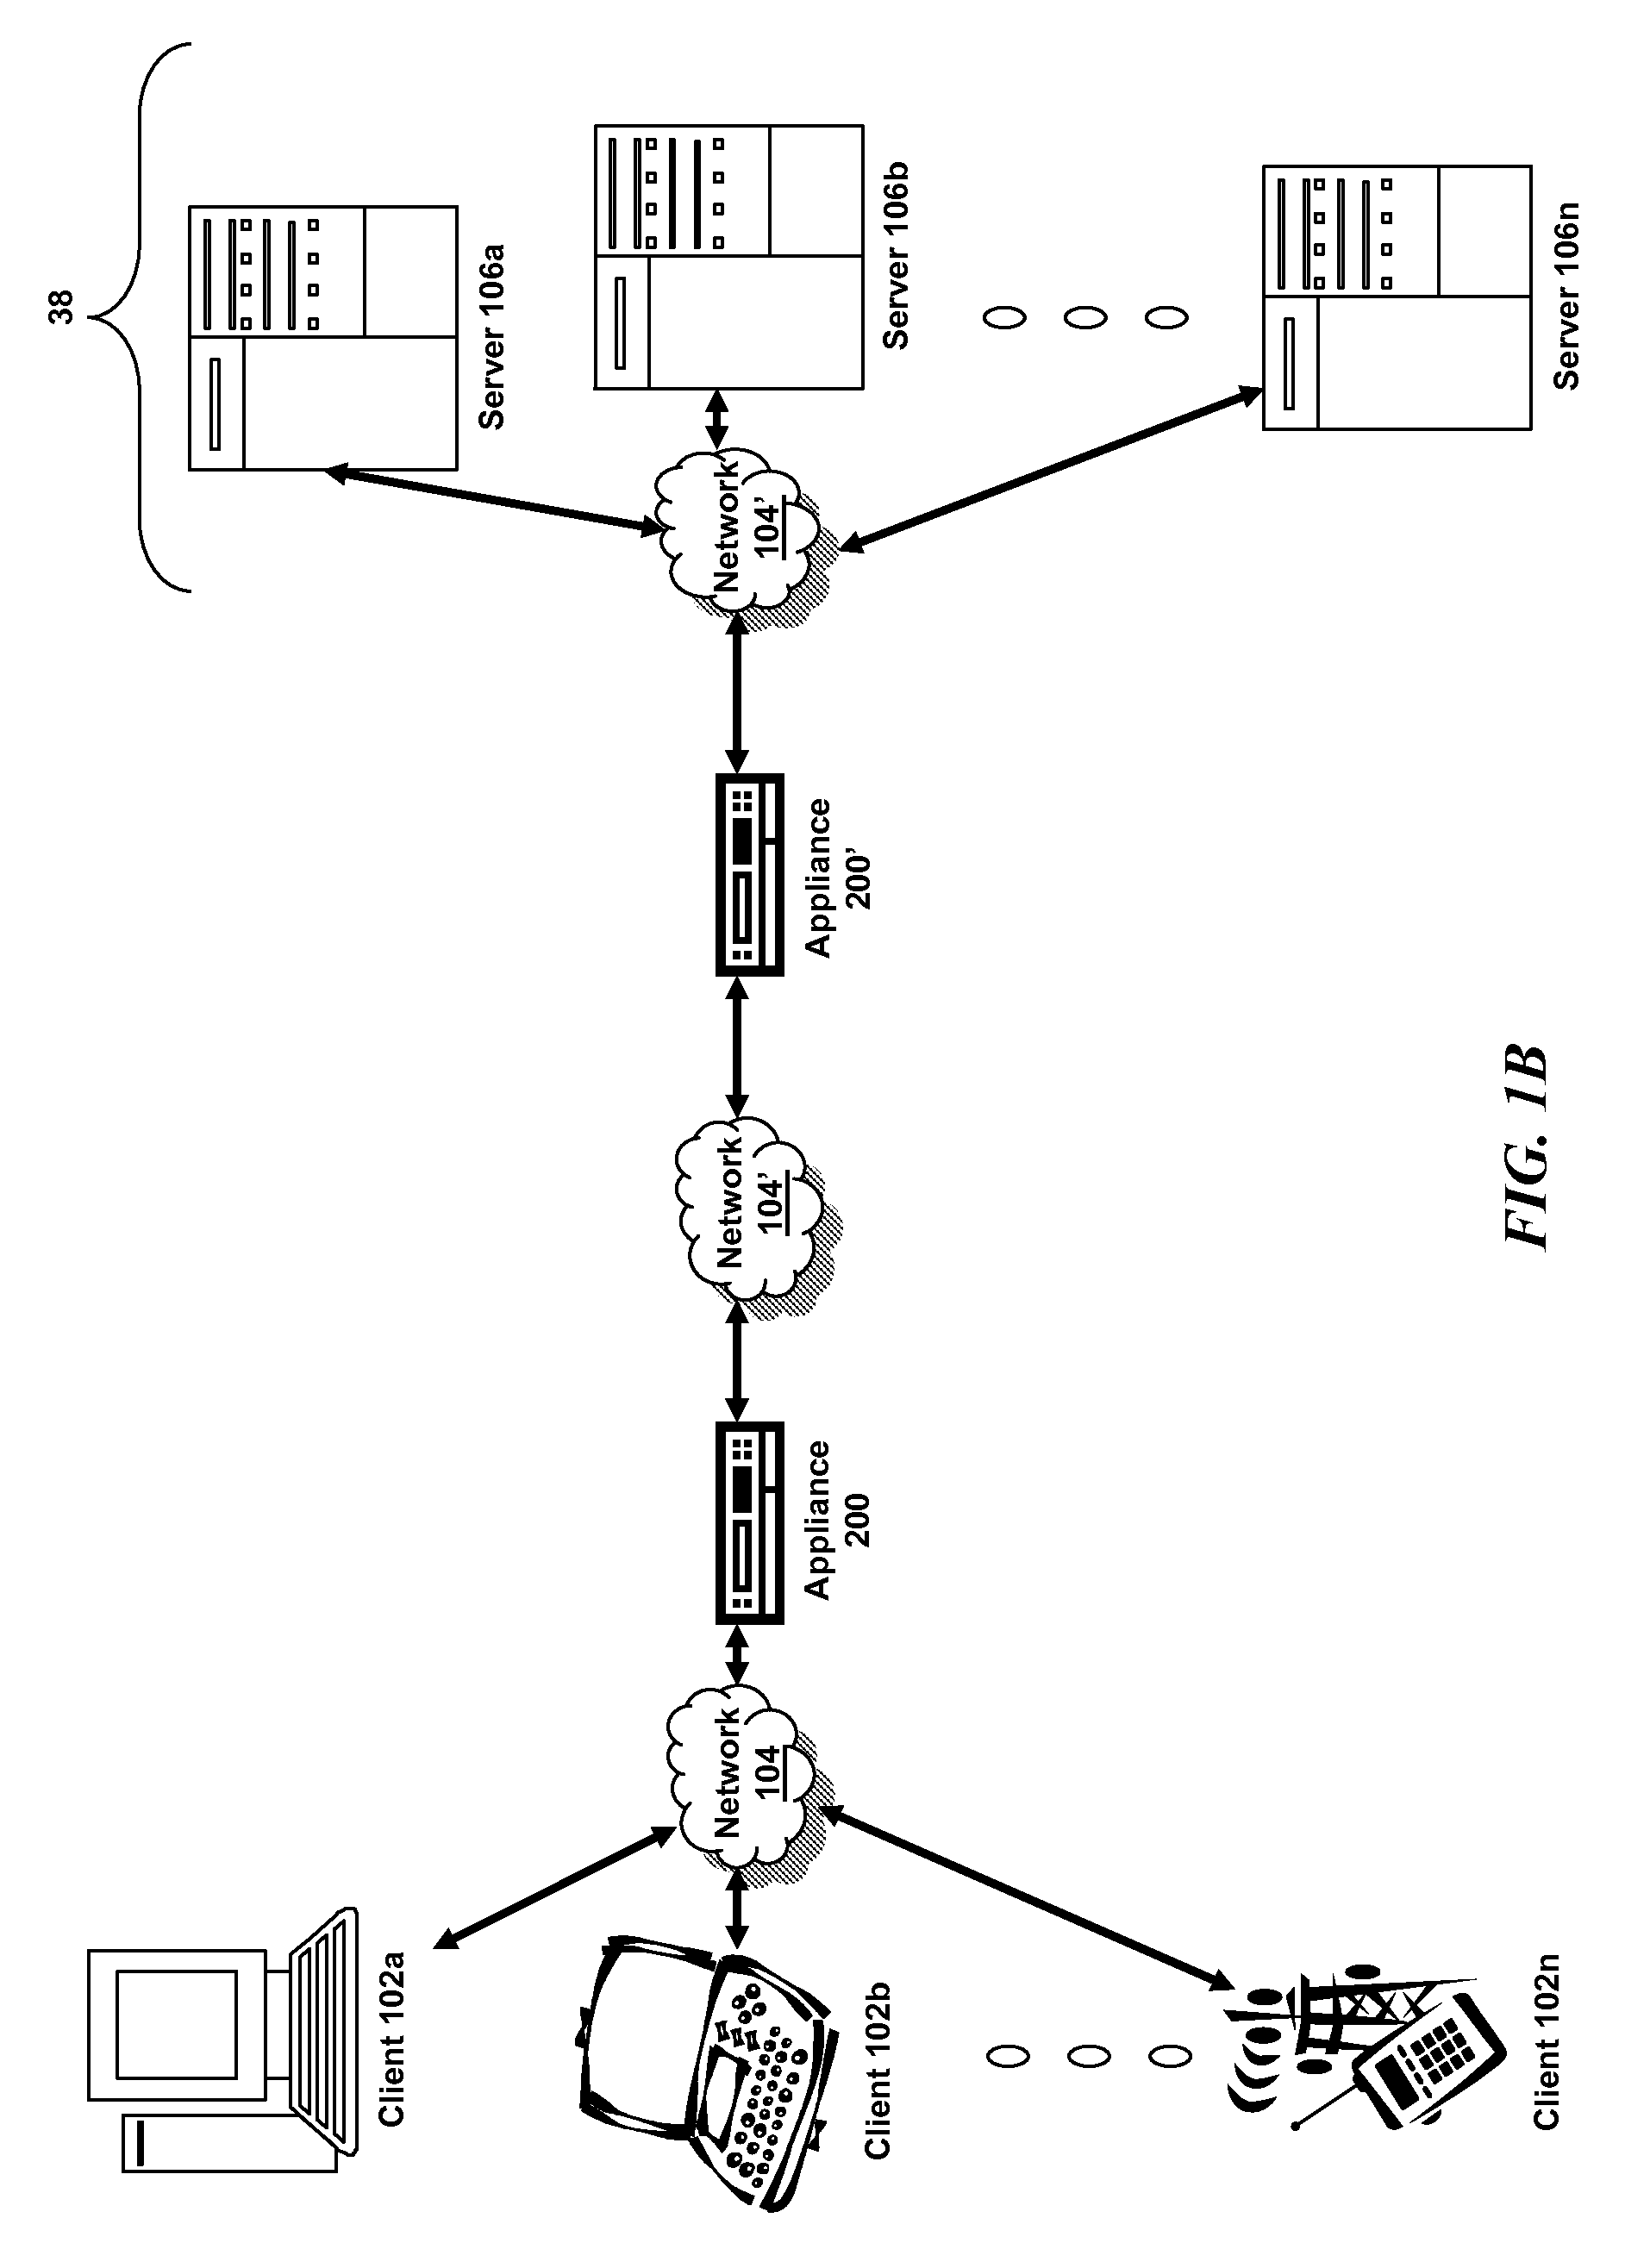 Systems and methods for packet steering in a multi-core architecture